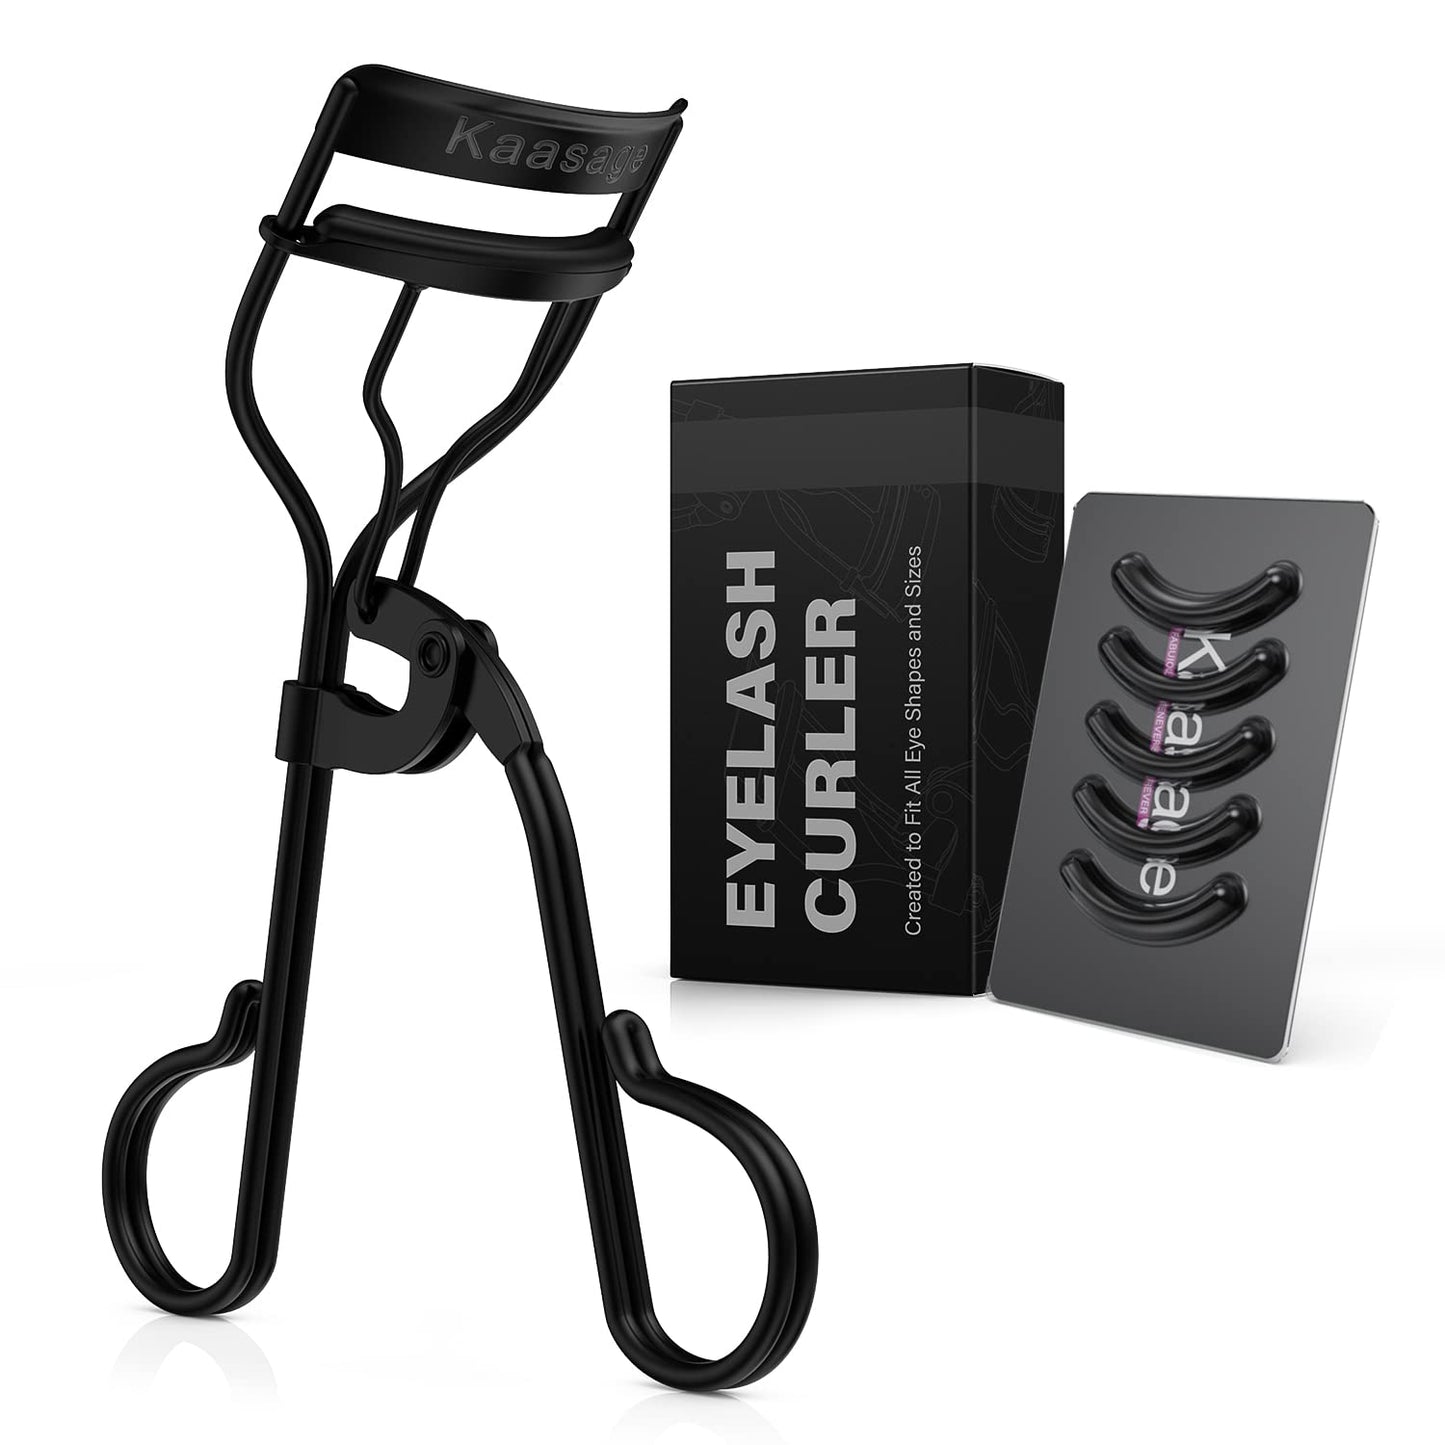 Kaasage Eyelash Curler for Women - Black Professional Lash Curler with Refill Silicone Pads. Easy to Curl Open-Eye Eyelashes Naturally in Seconds with No Pinching, No Pulling and Last Long